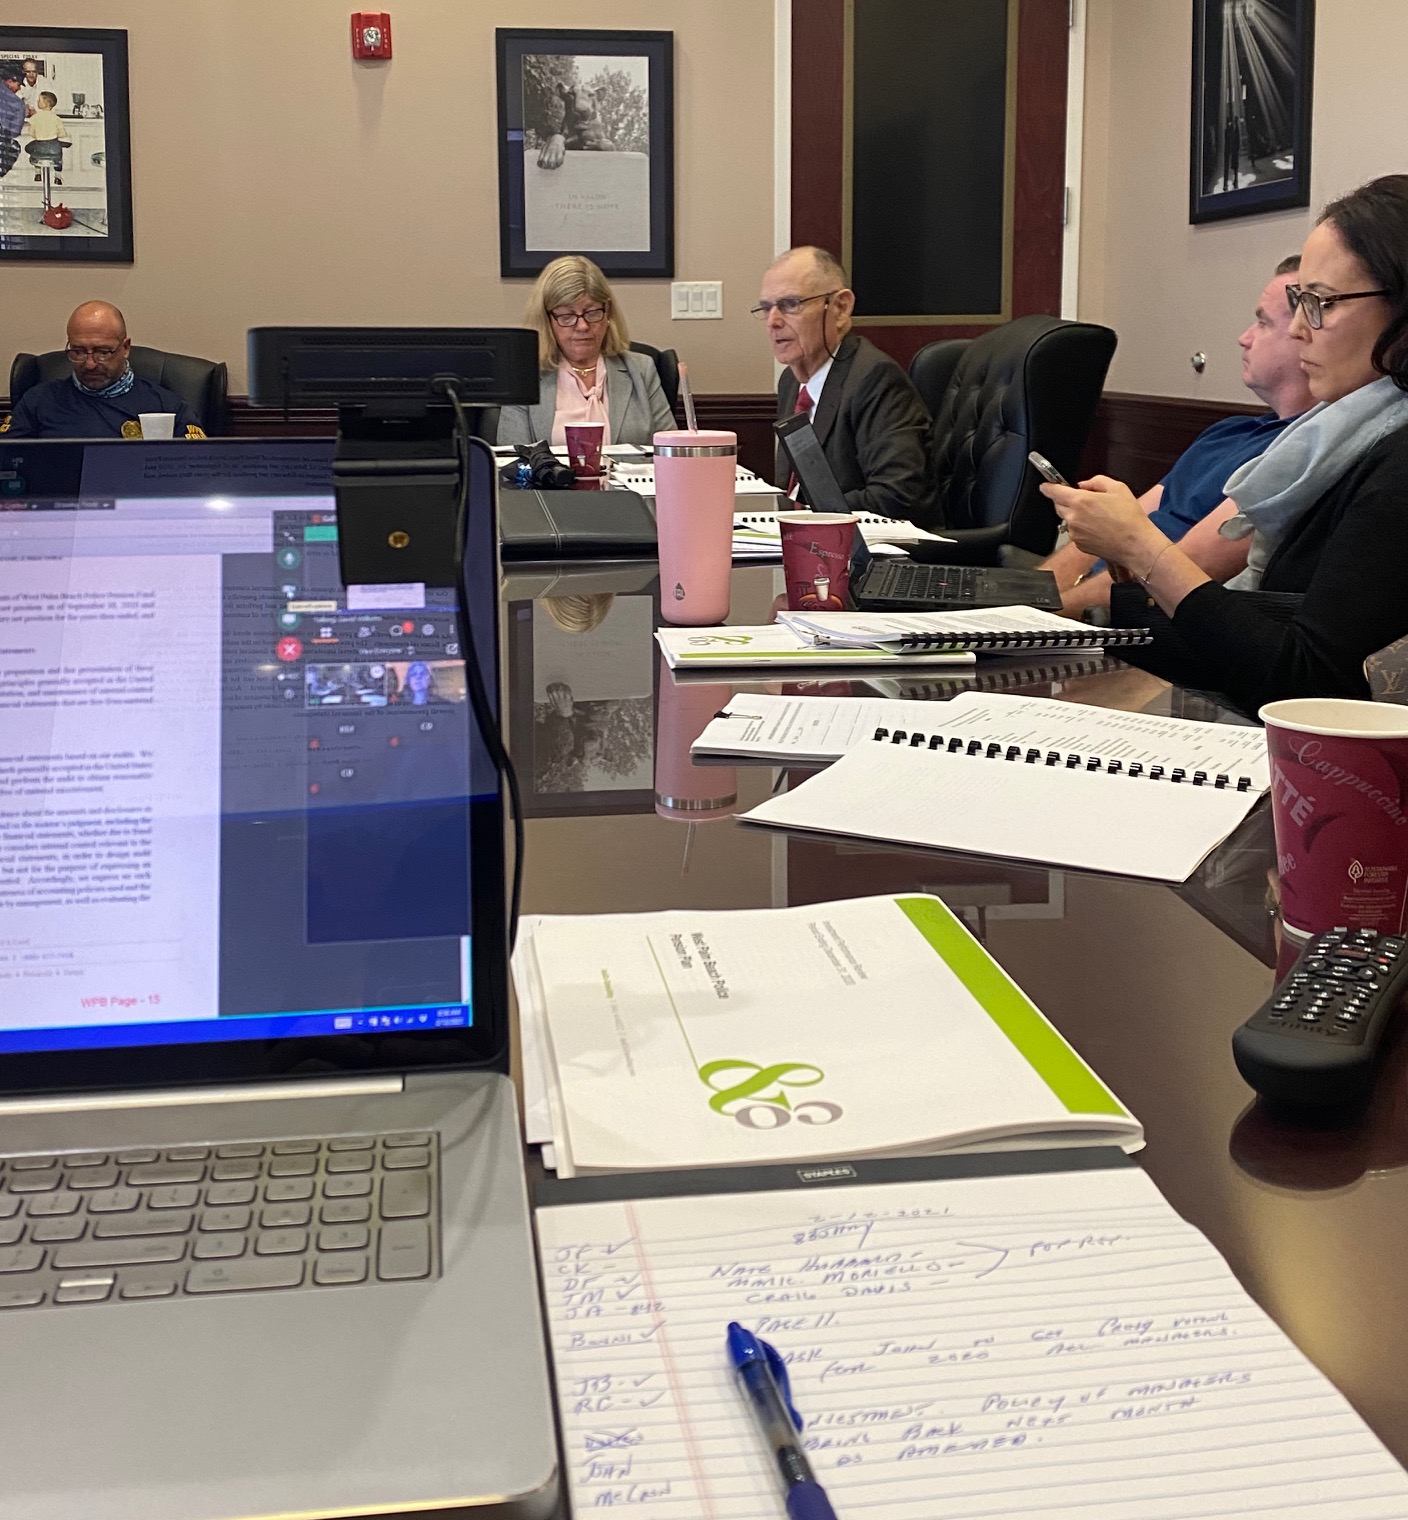 The Board of Trustees received the financial statements report from our independent auditor. The entire report may be viewed on the Disclosure Page of this website.